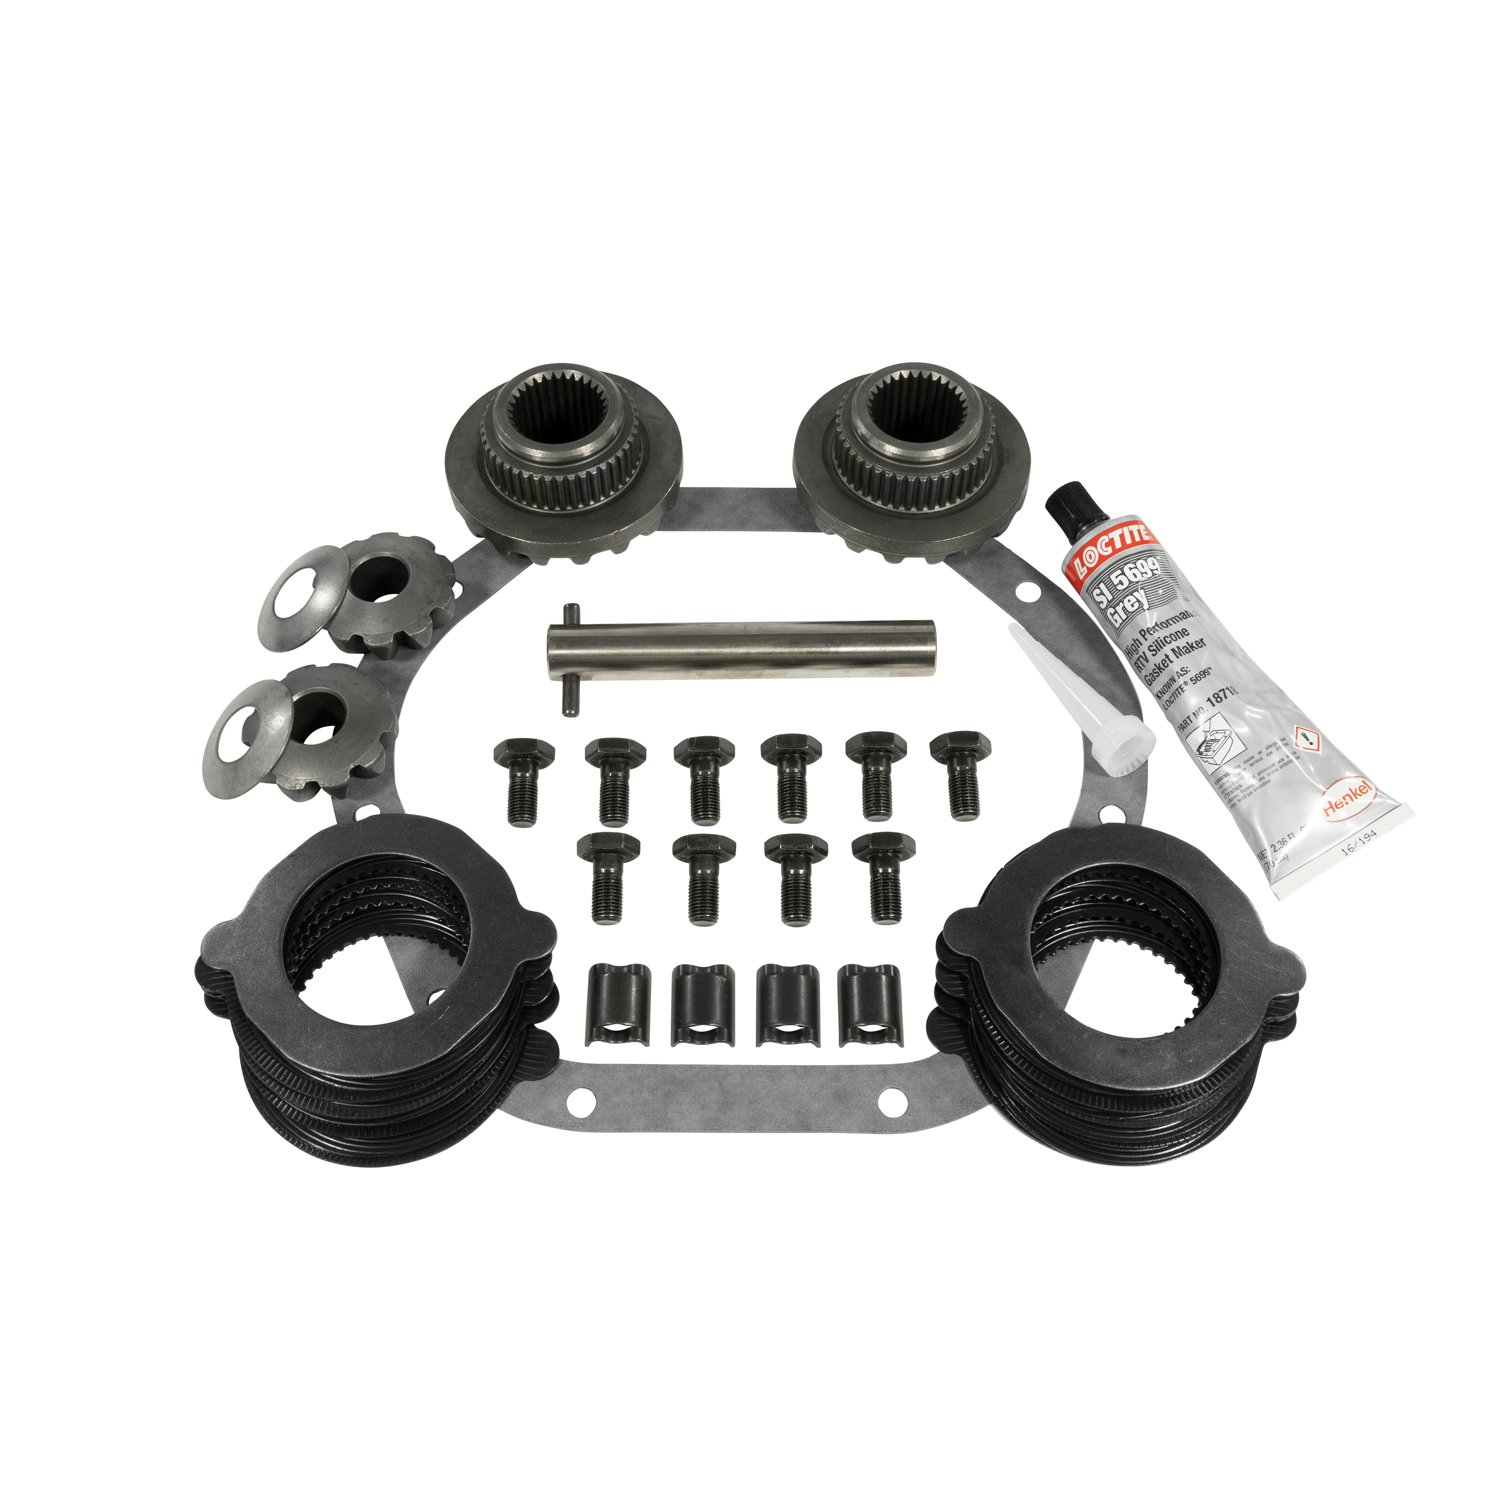 Replacement Spider Gear Kit Dana 44 Trac Loc Positraction